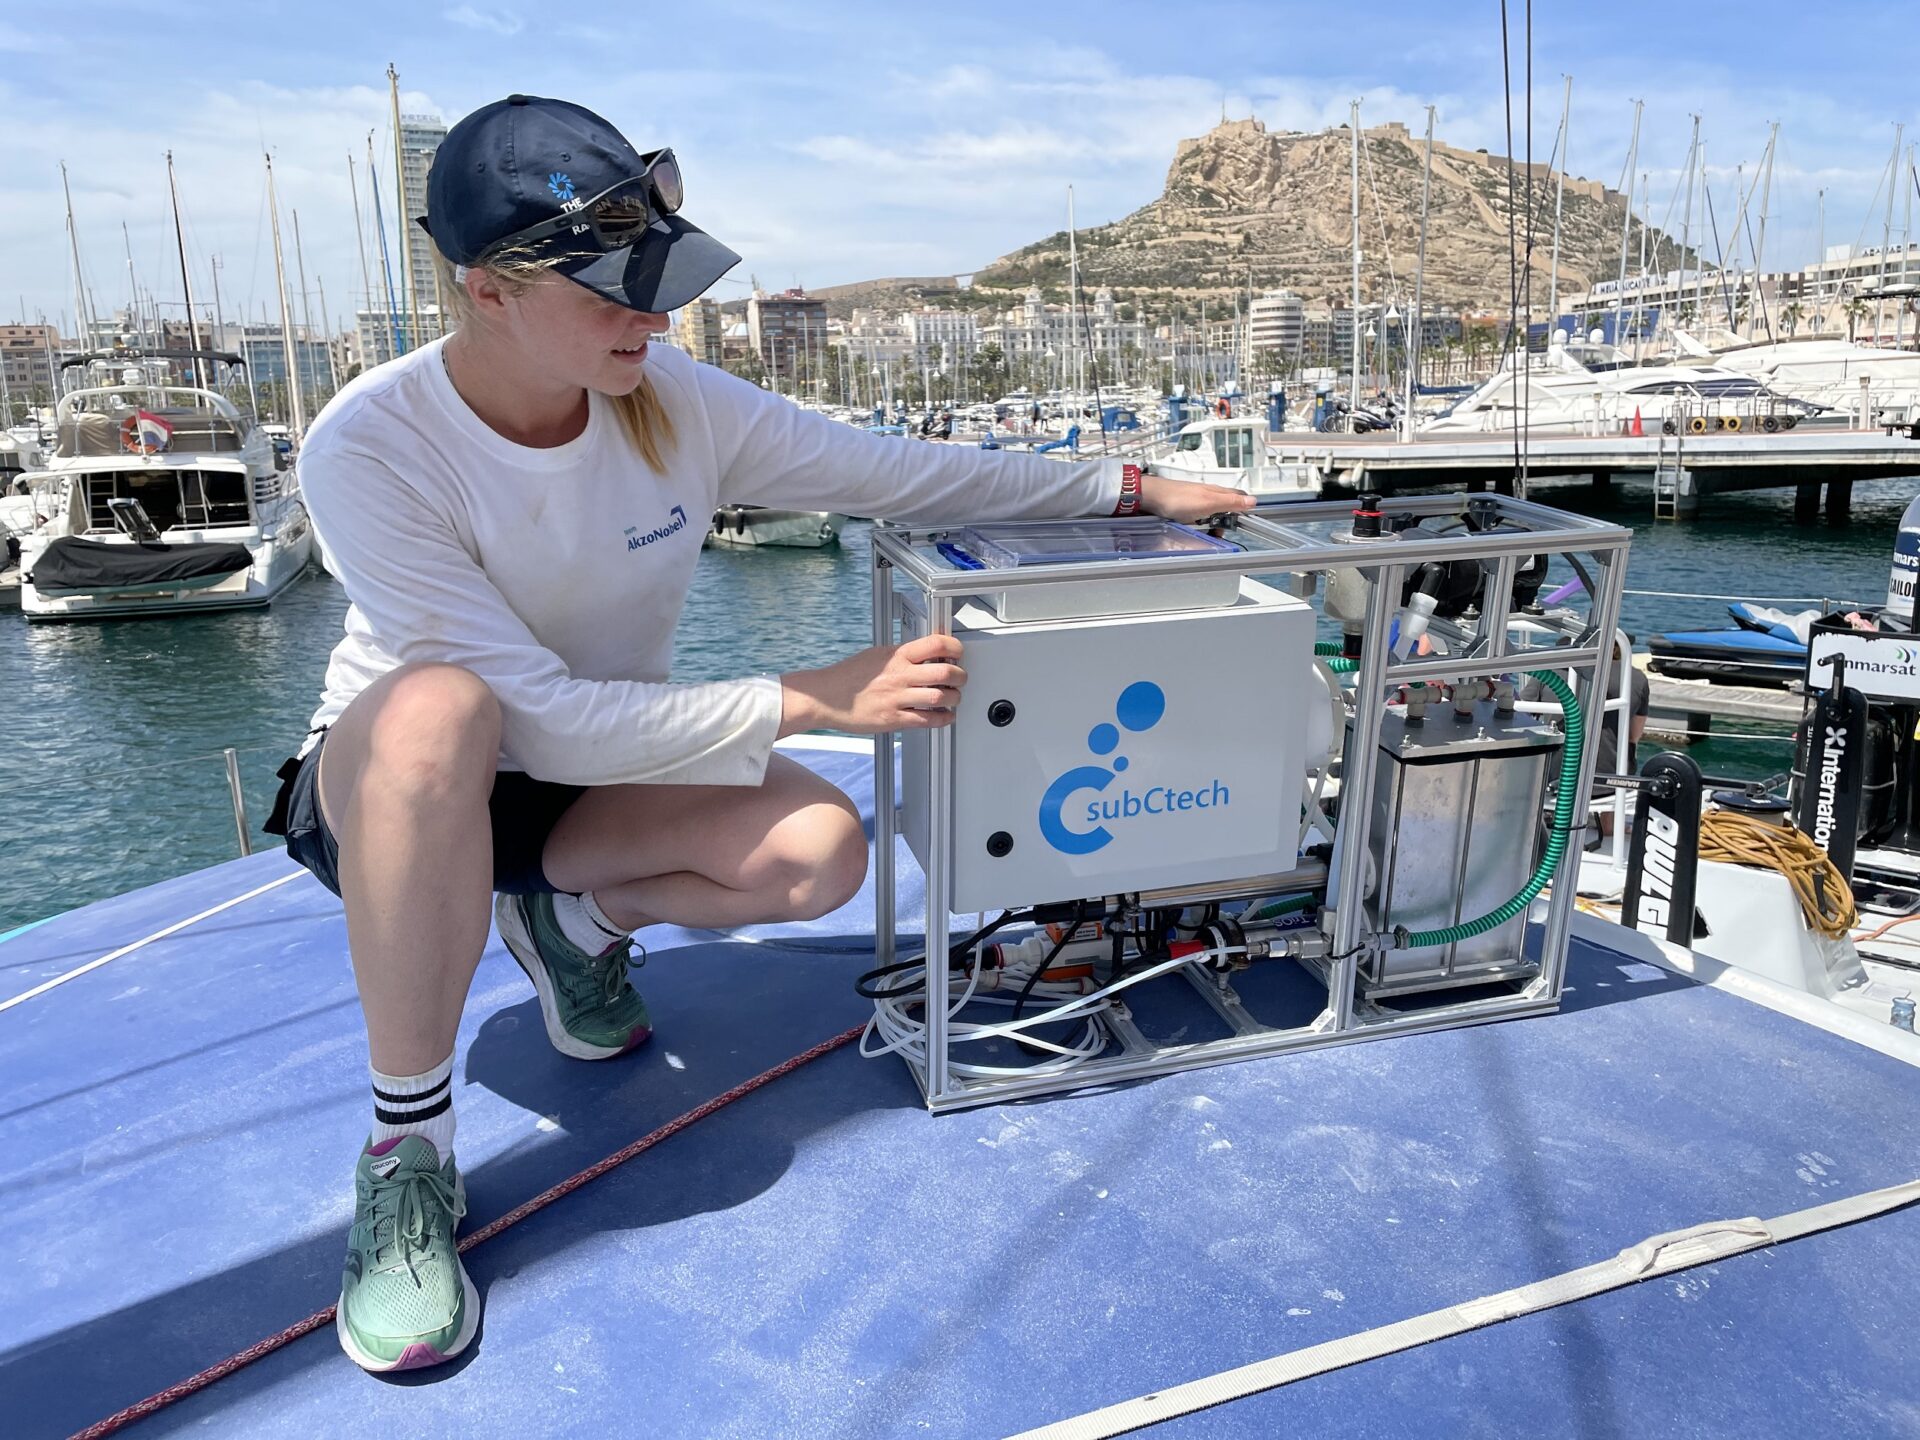 AkzoNobel Ocean Racing gets ready to install science equipment in Alicante, Spain, for The Ocean Race Europe